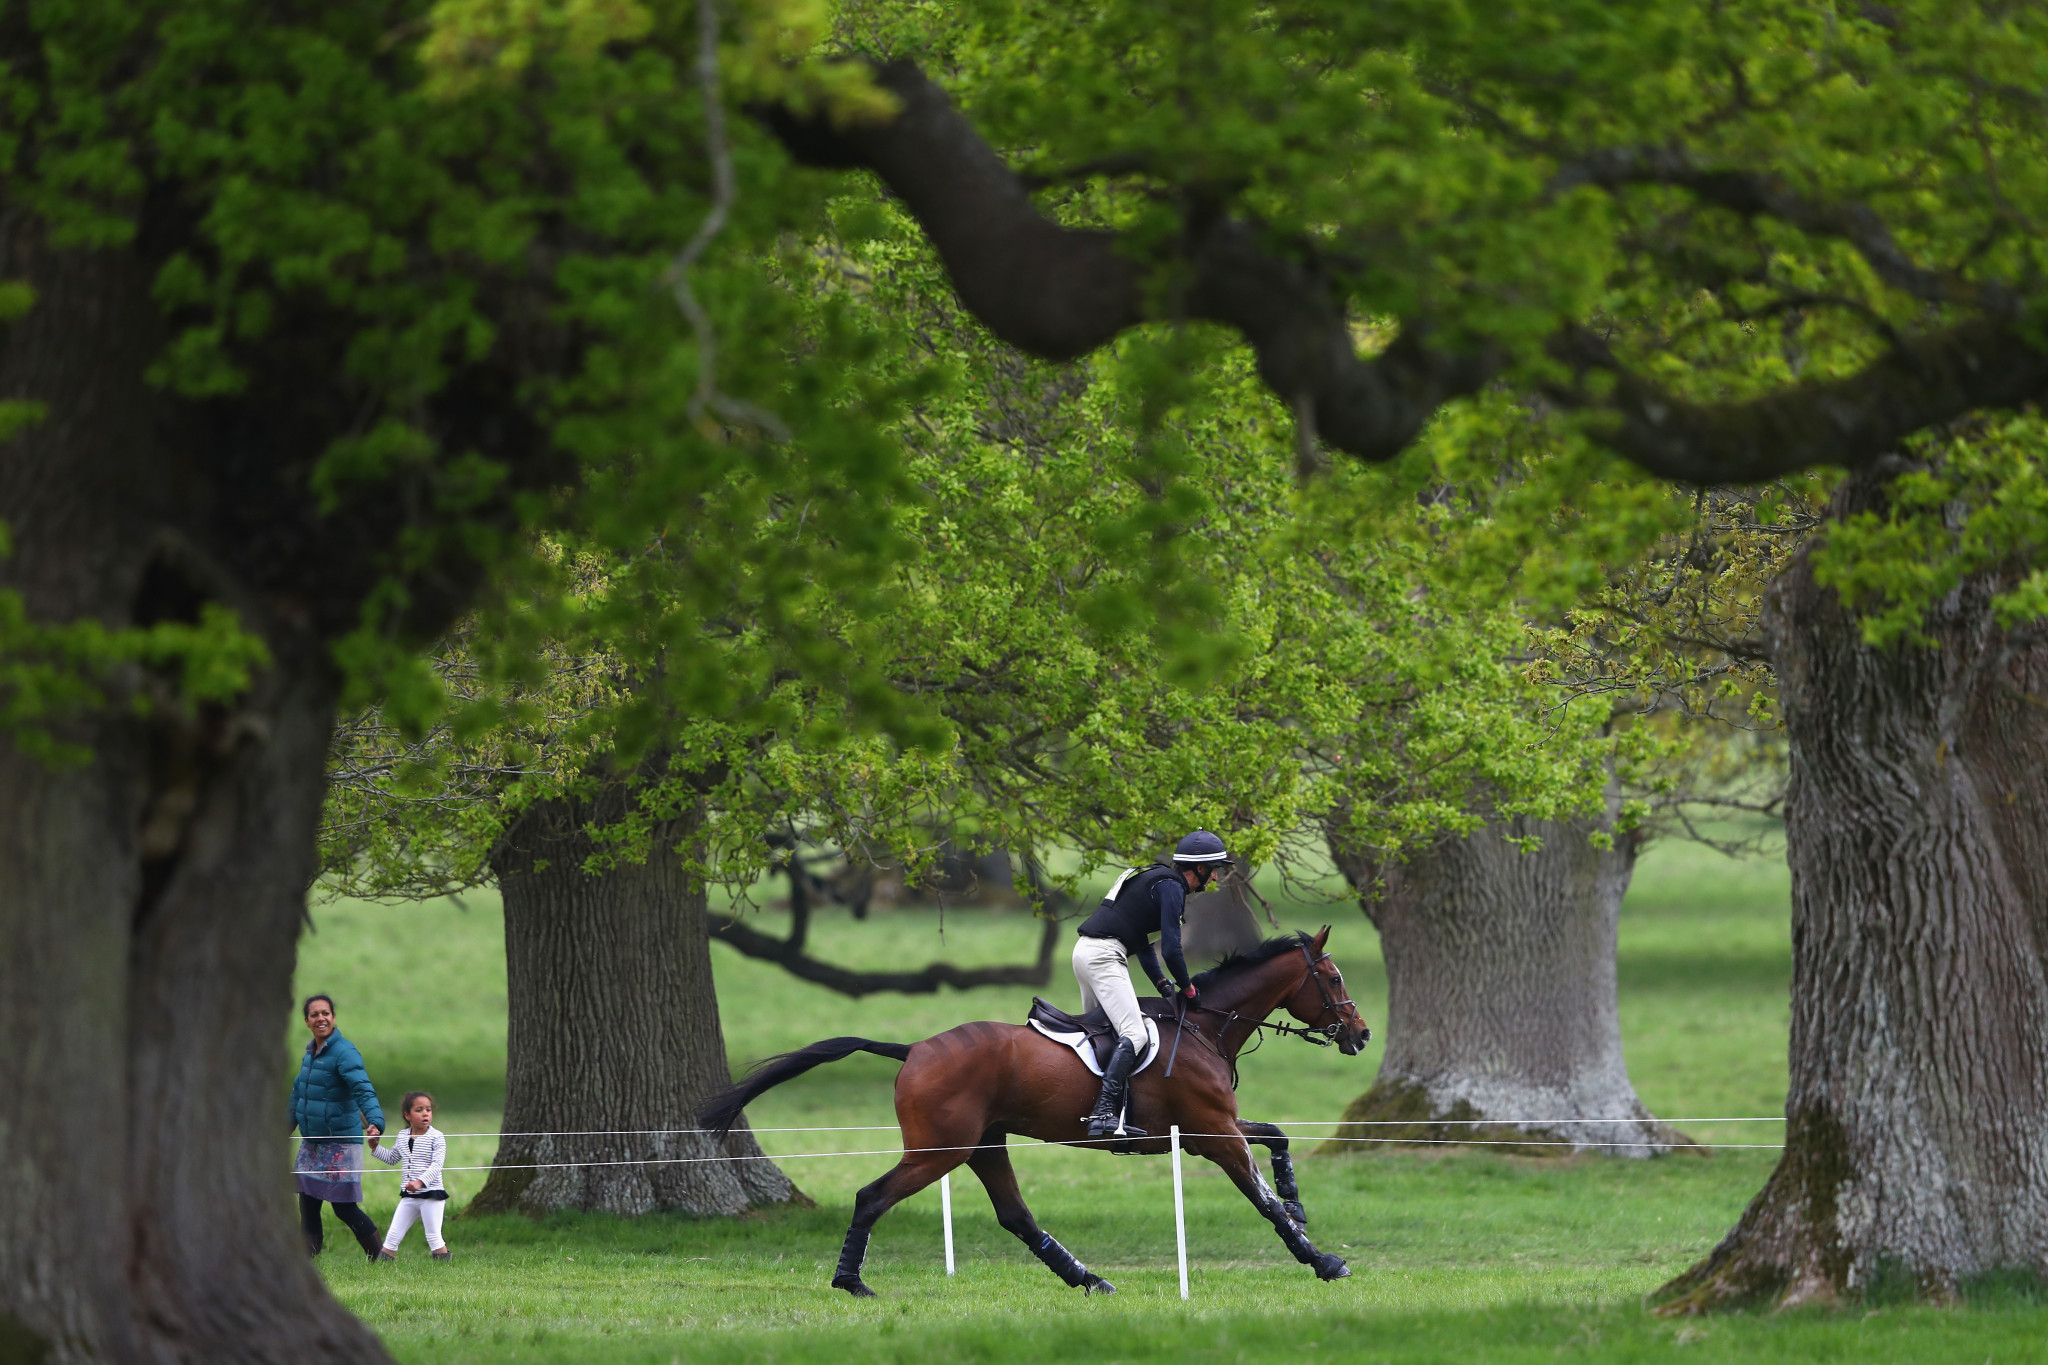 The incident occurred at the Badminton Horse Trials ©Getty Images